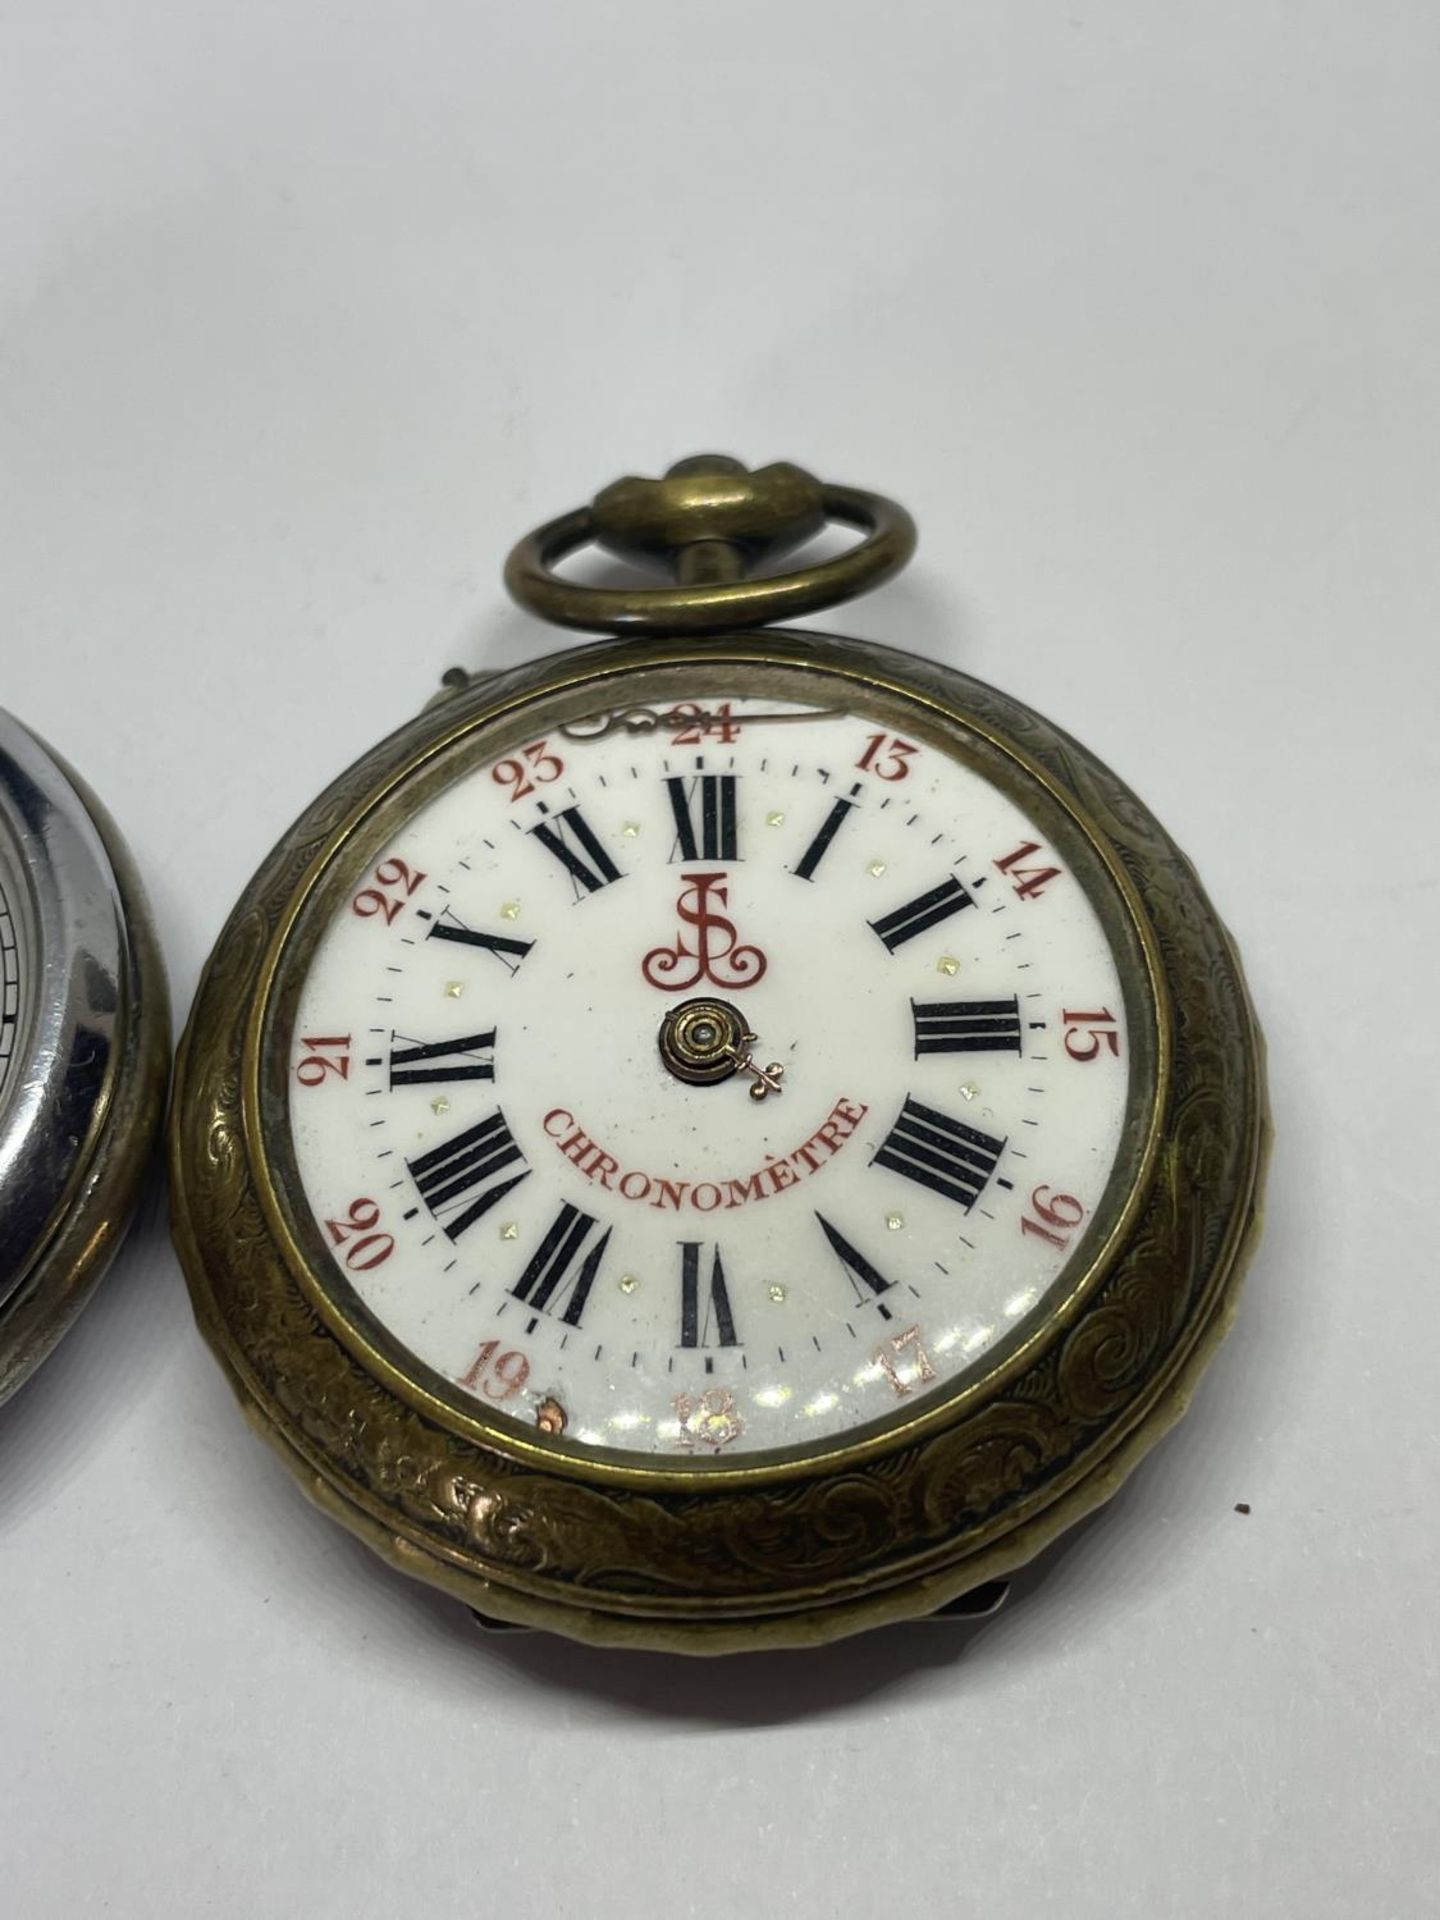 TWO POCKET WATCHES FOR SPARES OR REPAIR - Image 3 of 4